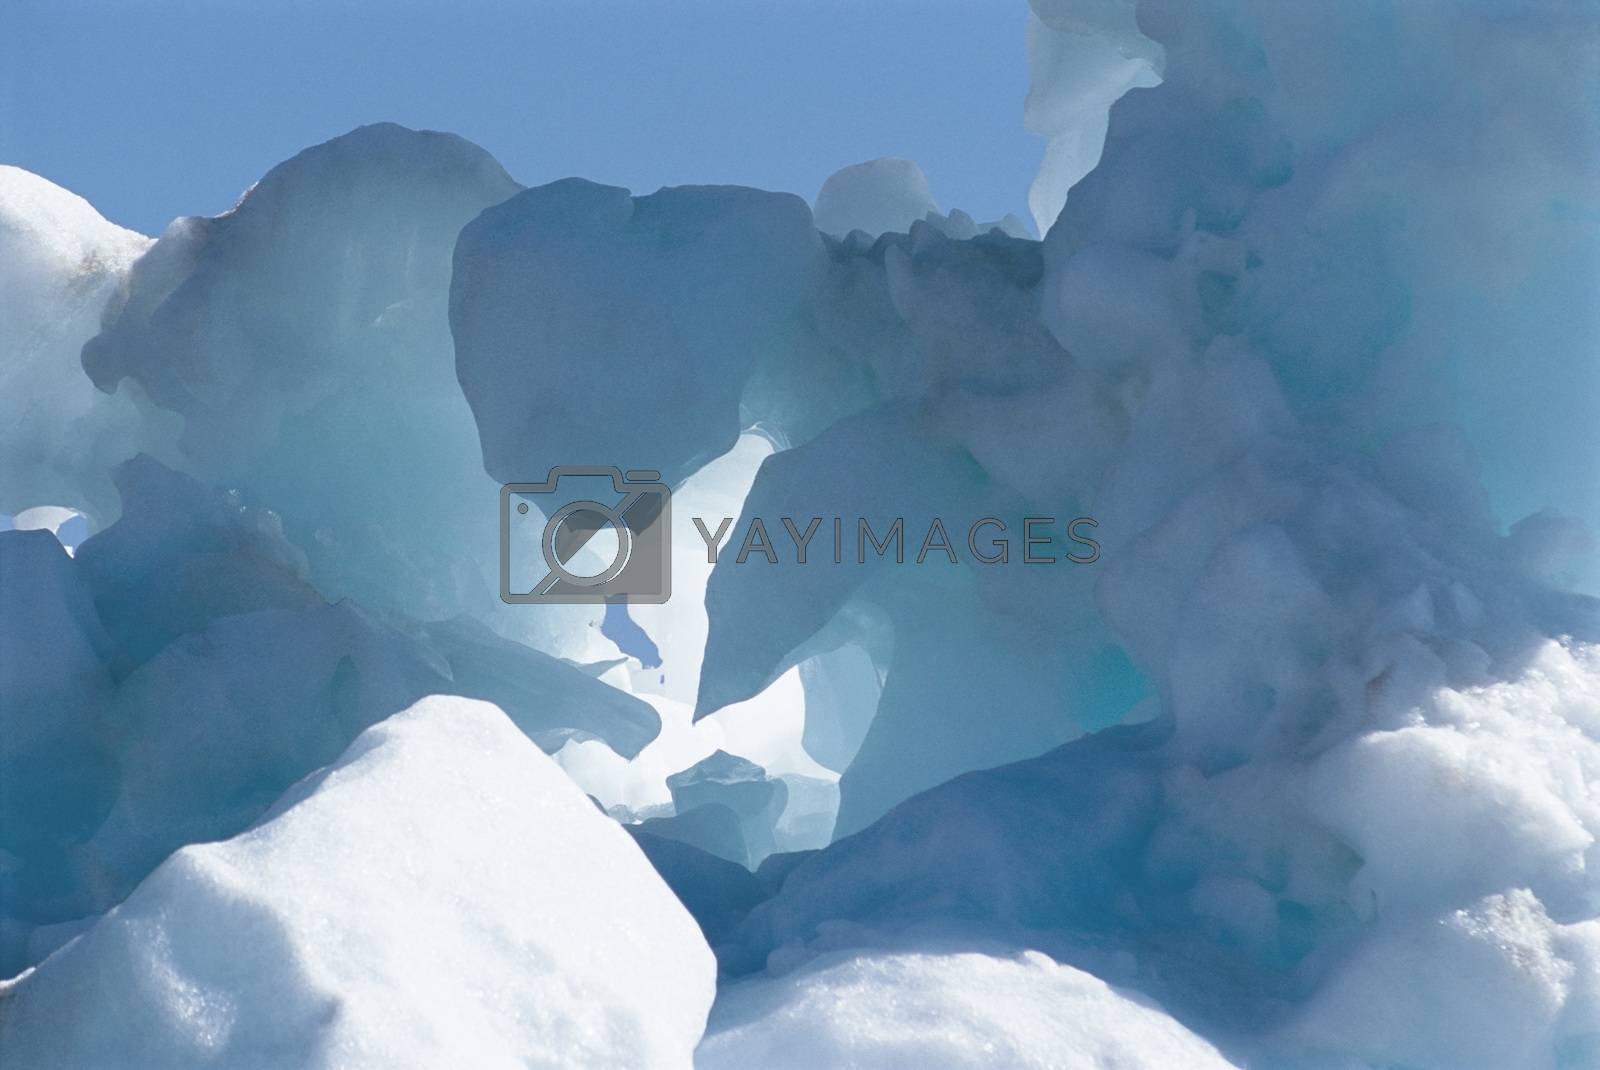 Royalty free image of Low angle view of ice formation by moodboard